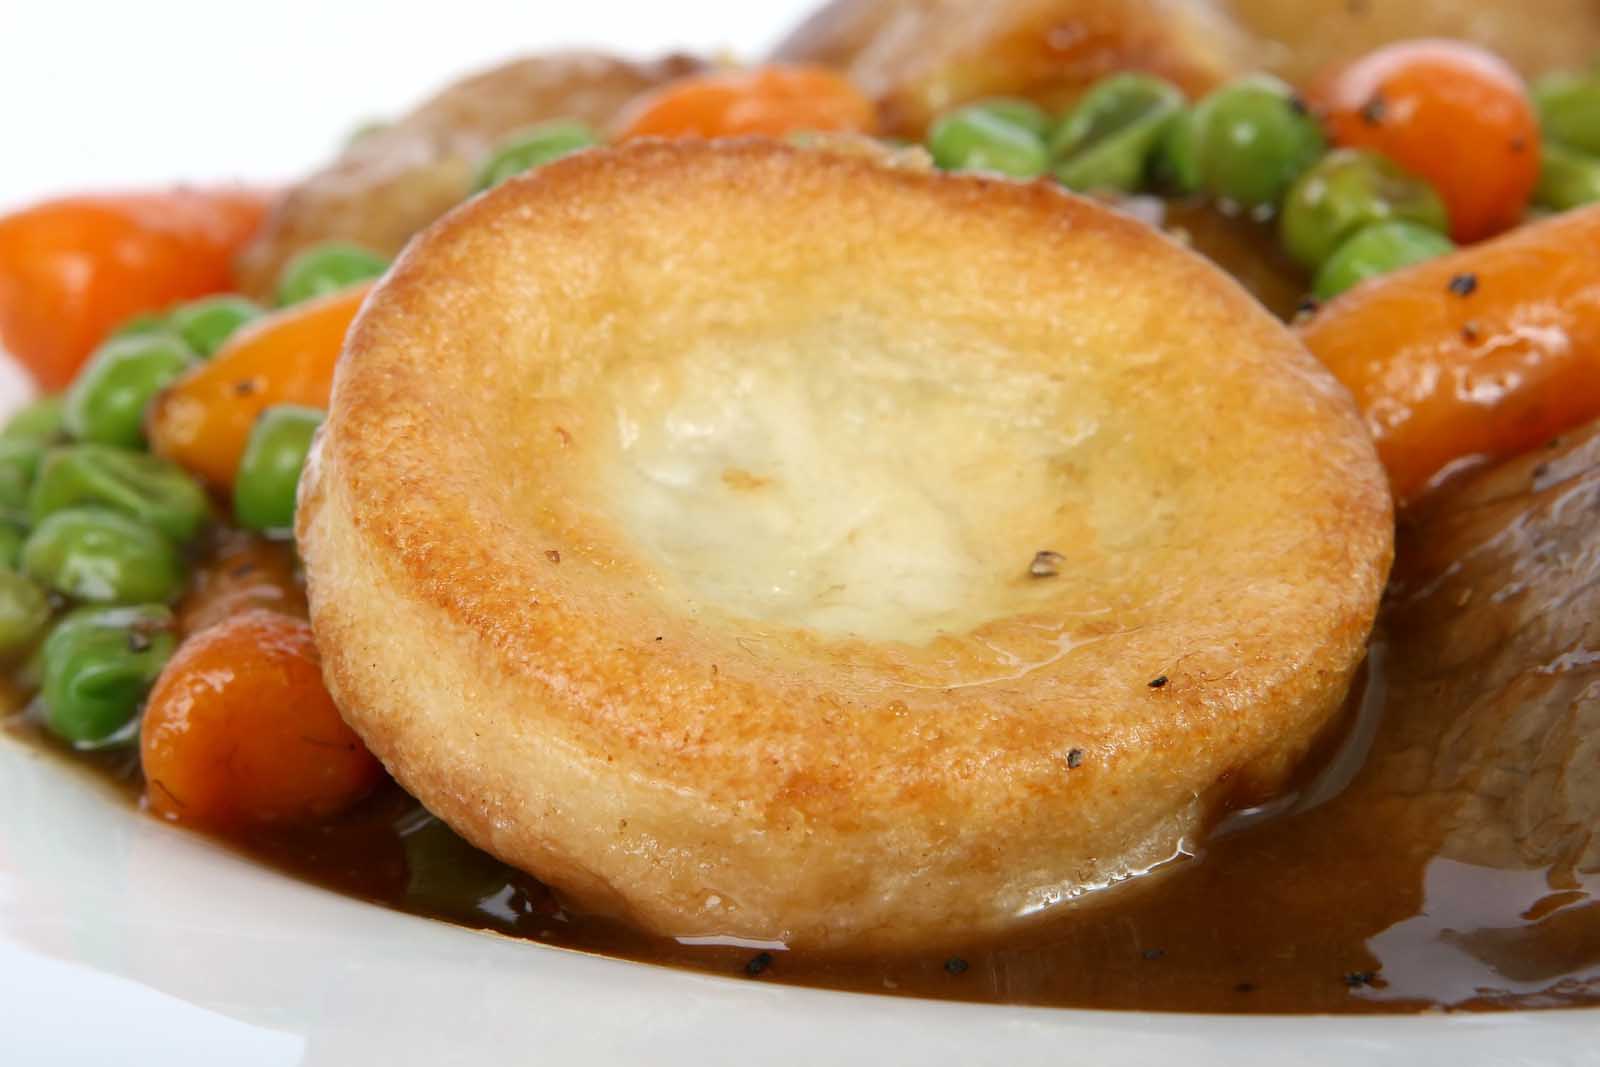 Yorkshire Pudding is a staple British Food